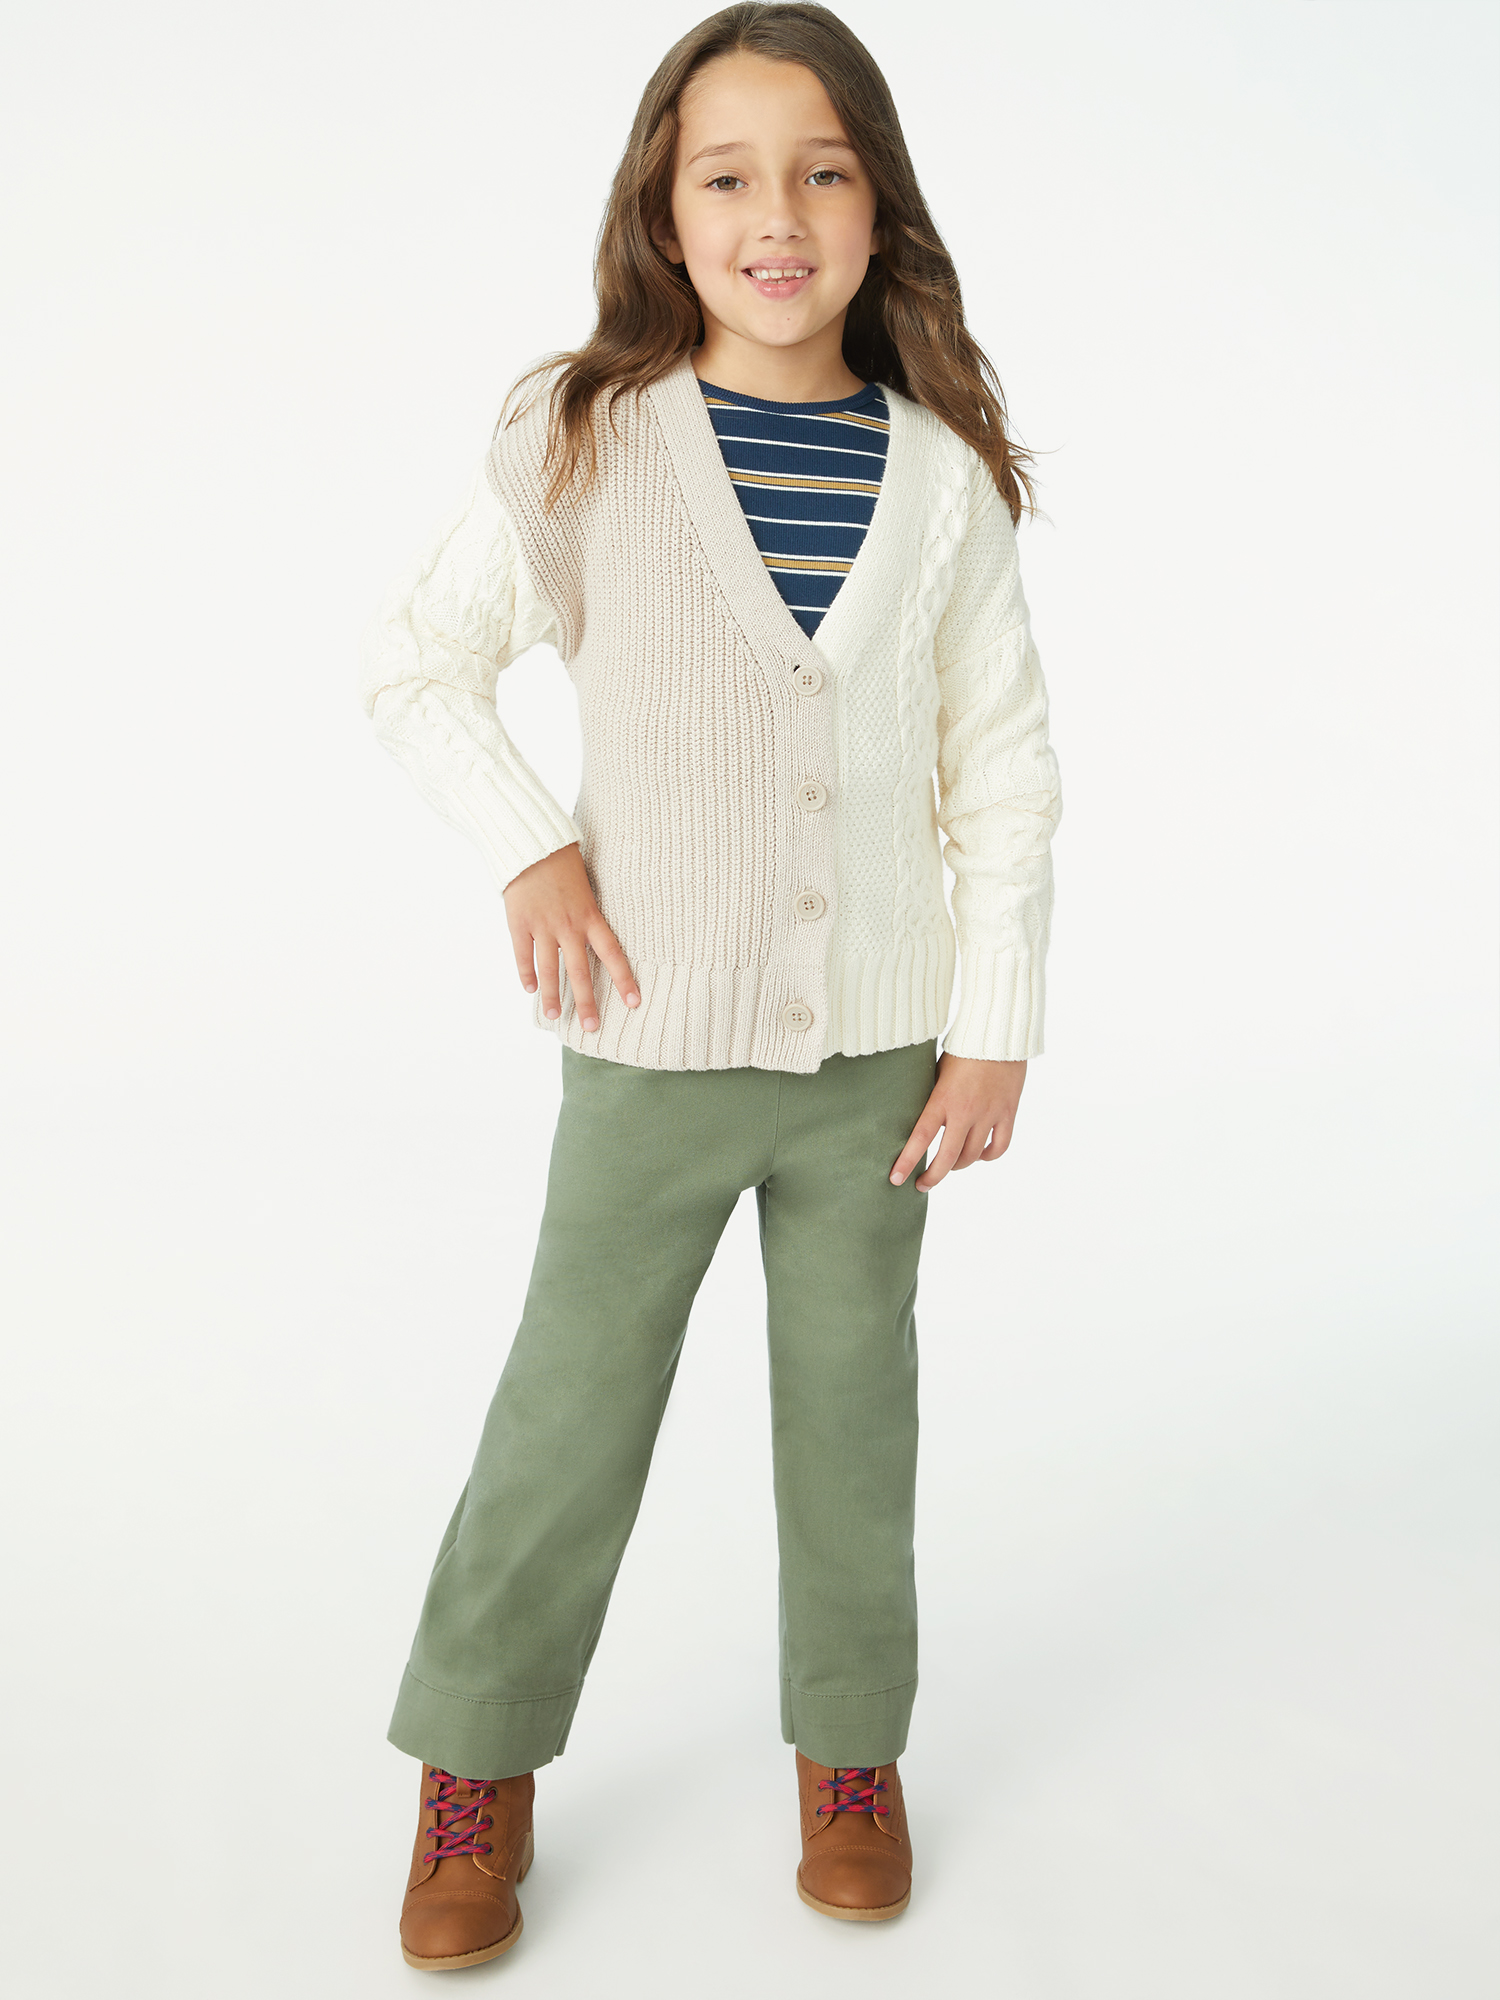 Free Assembly Girls Cable Knit Grandpa Cardigan, Sizes 4-18 - image 2 of 5